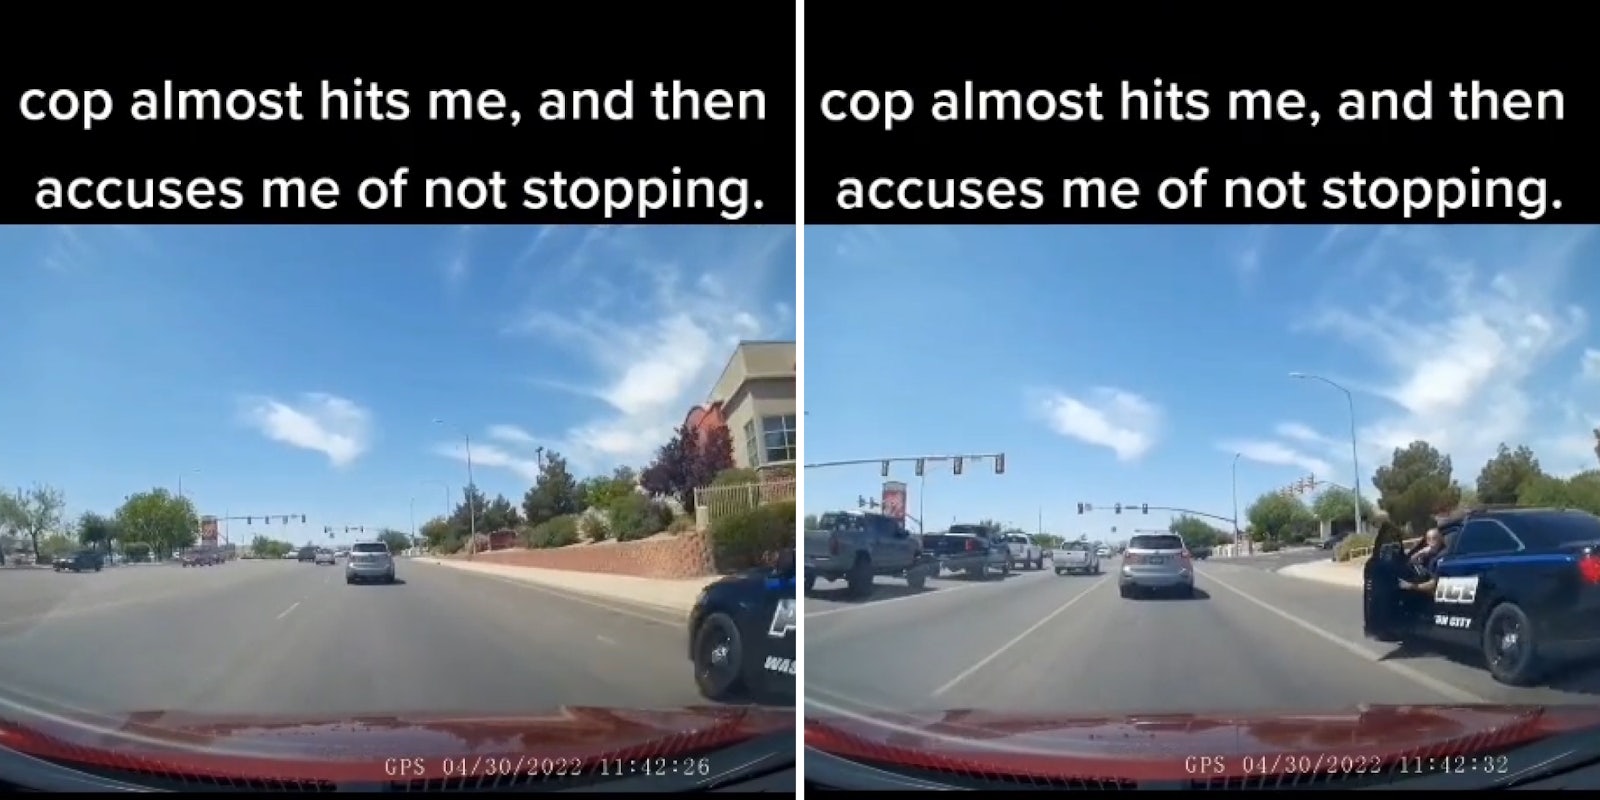 dashcam footage cop car to right driving very close to car caption 'Cop almost hits me, and then accuses me of not stopping.' (l) dashcam footage cop car stopped with door opening cop is exiting vehicle caption 'Cop almost hits me, and then accuses me of not stopping.' (r)